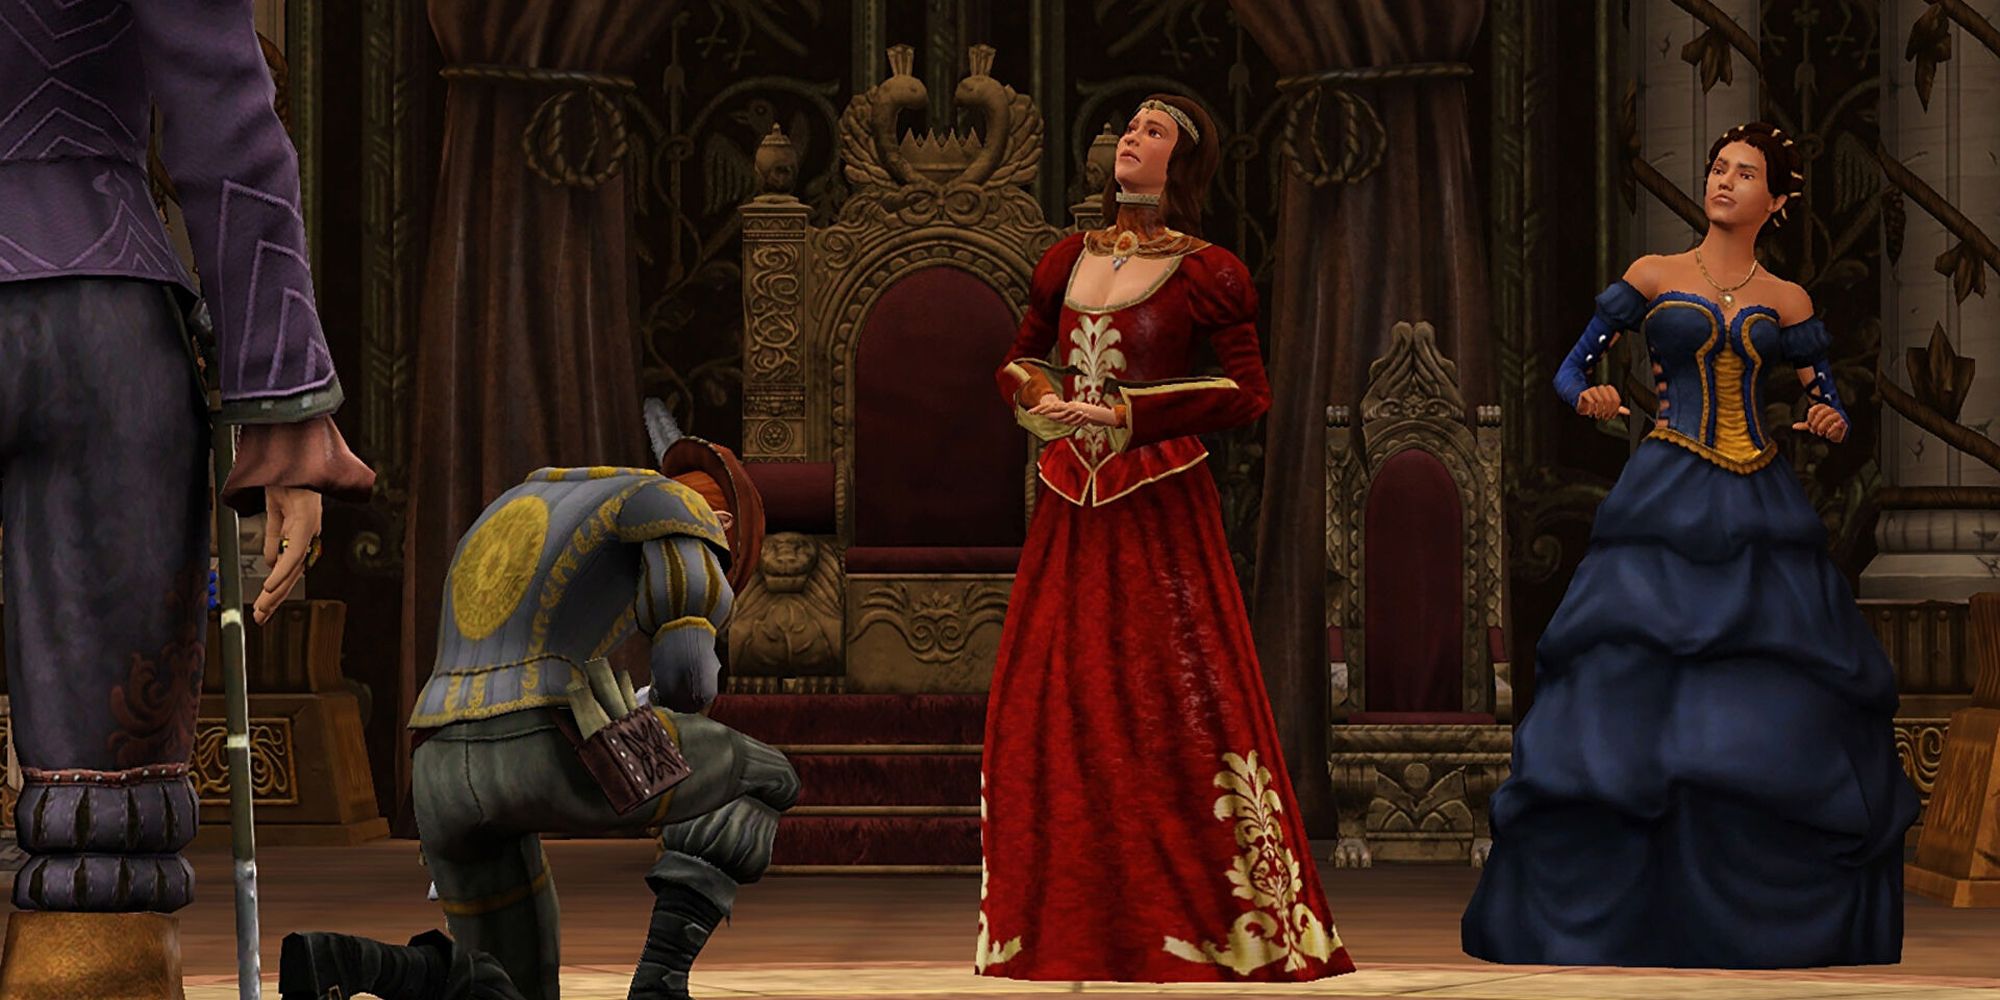 The Sims Medieval noble bowing to a queen who is standing in front of a throne